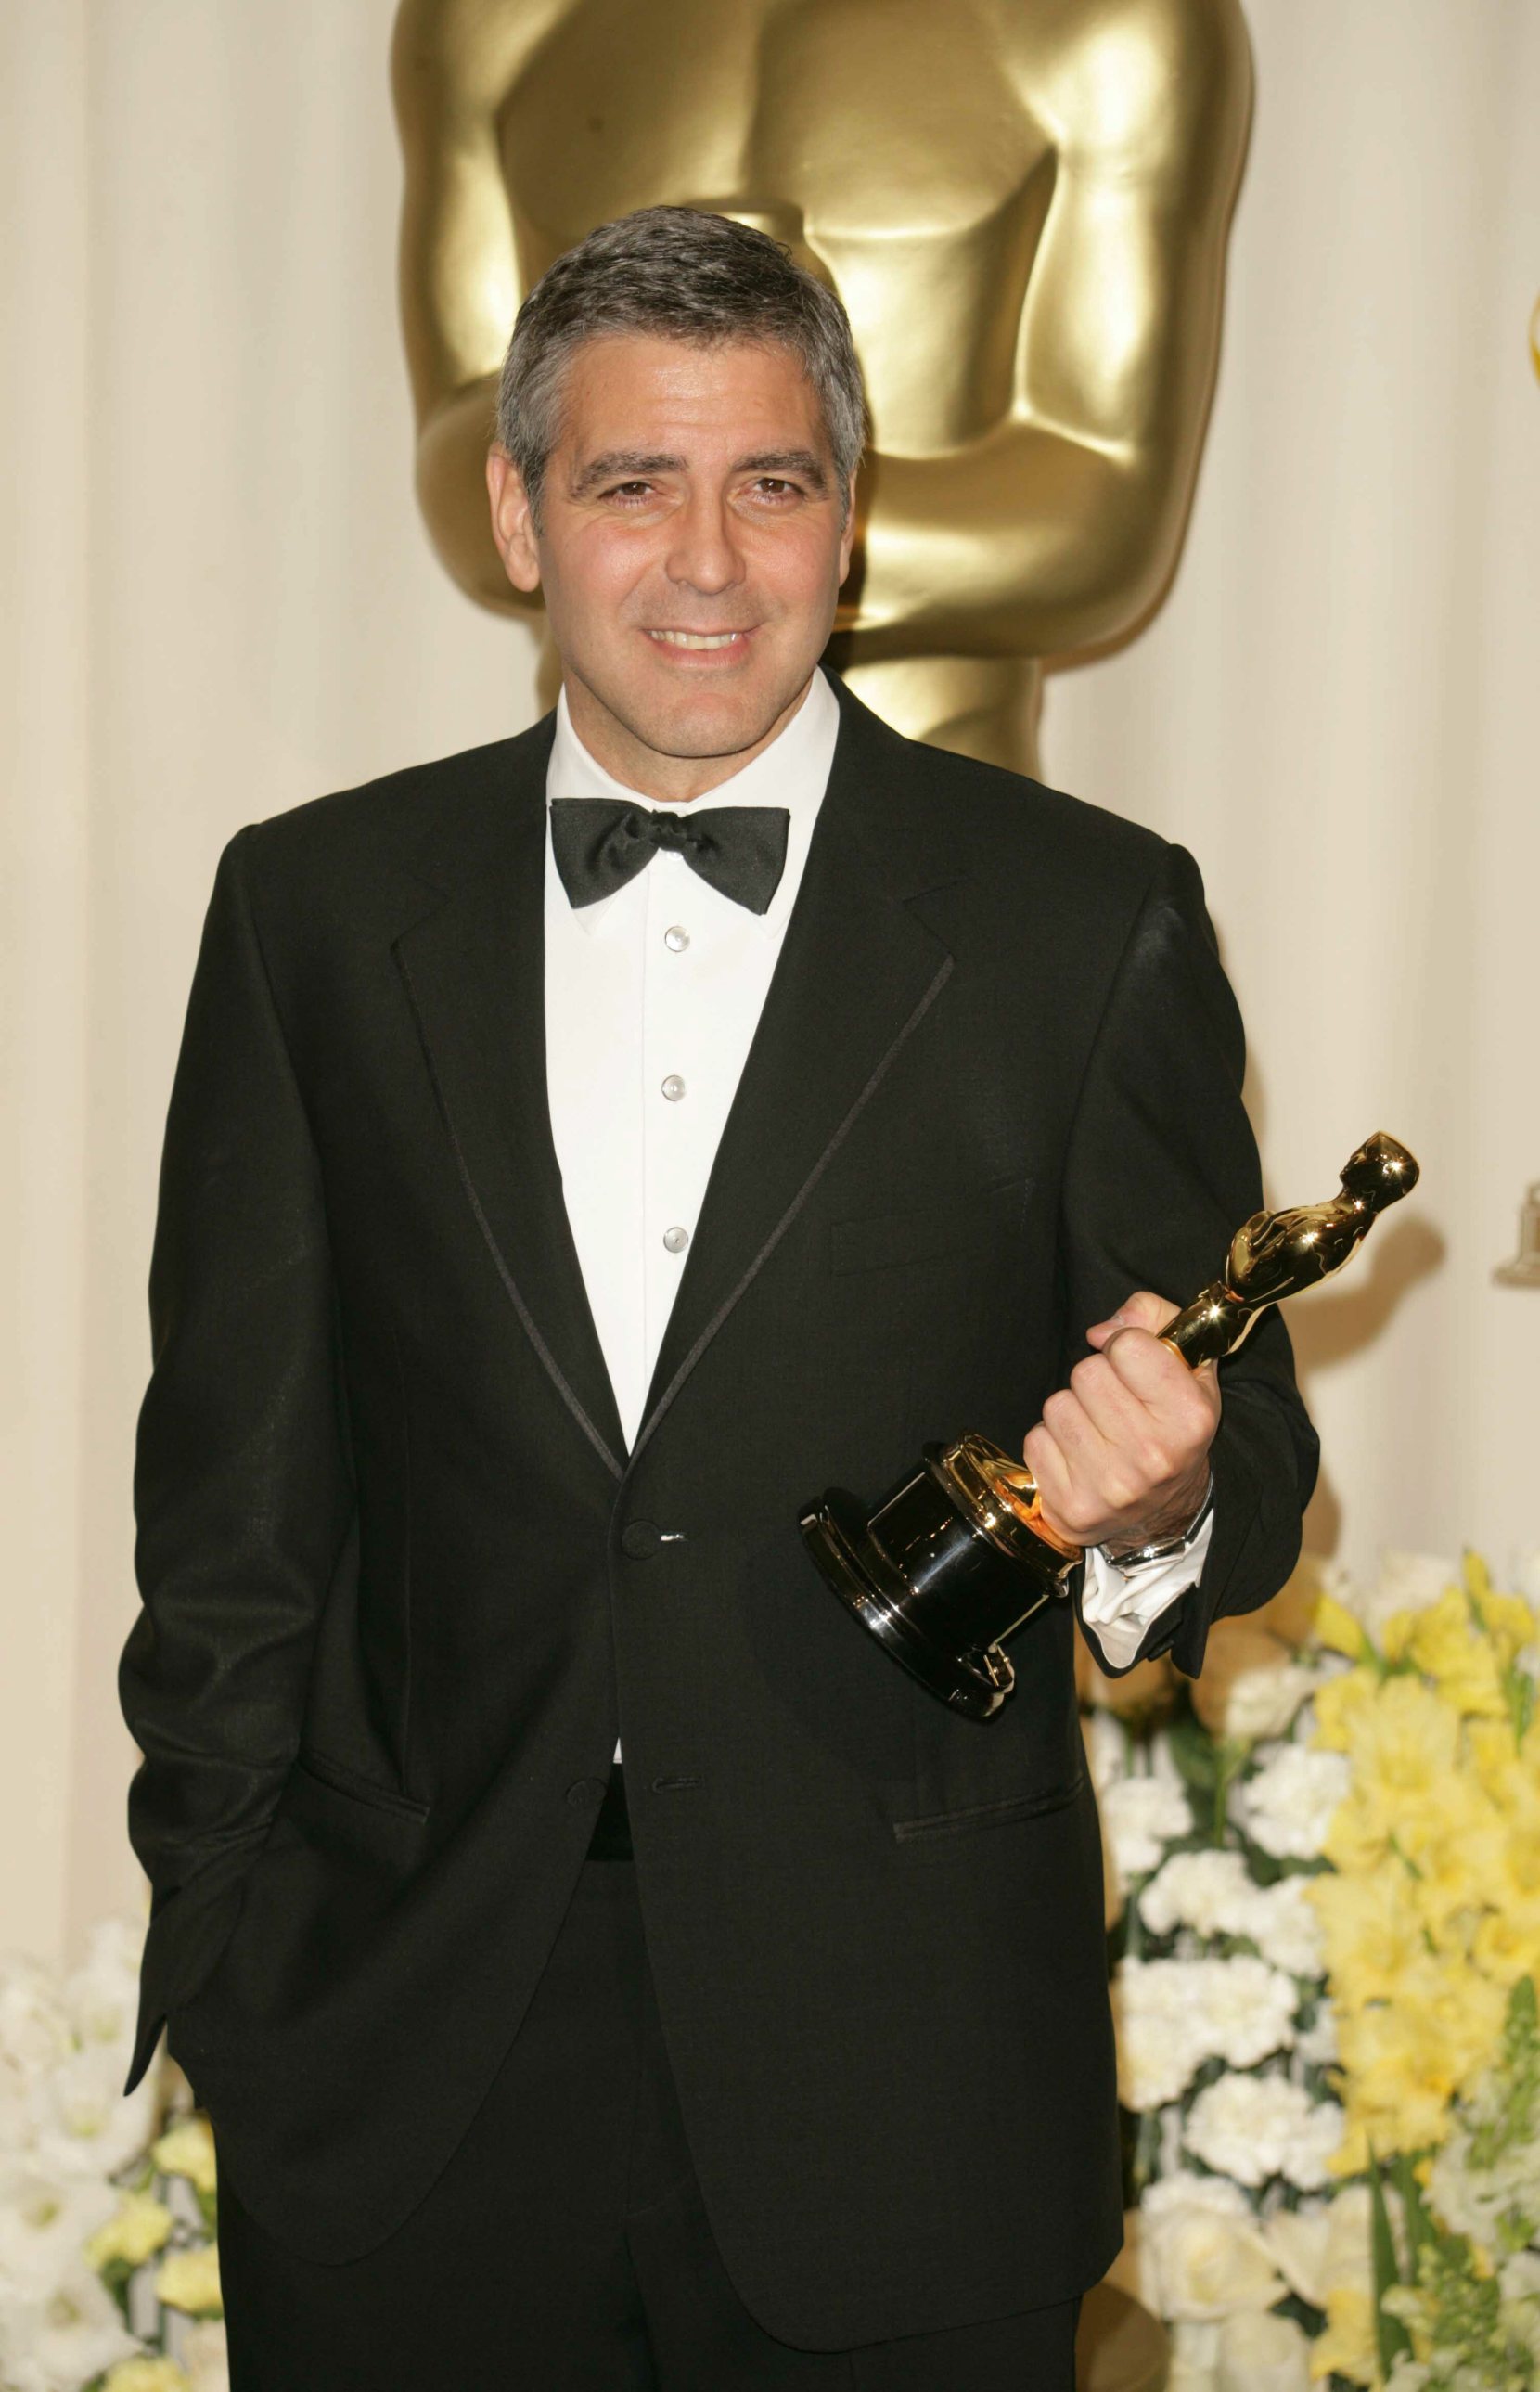 Clooney Slams Oscars for Lack of Diverse Nominations "We're